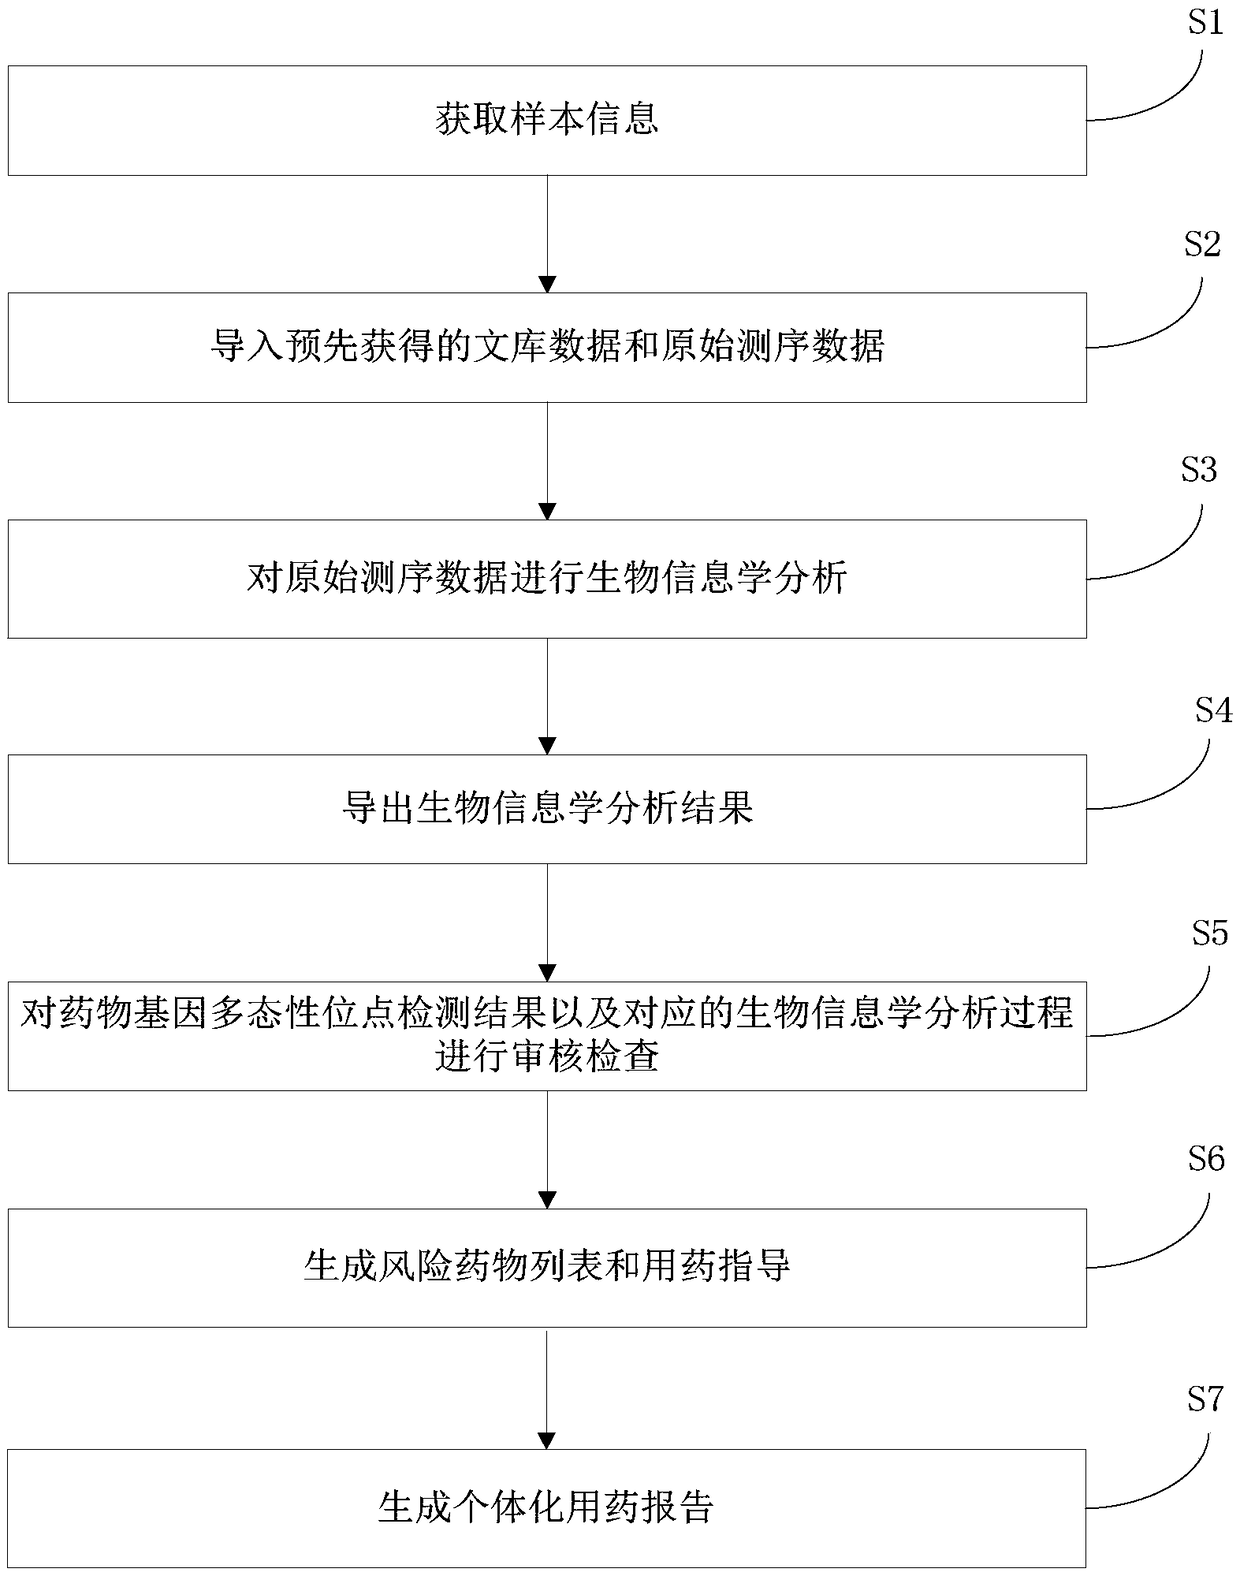 Individualized pharmacy report generation method and system